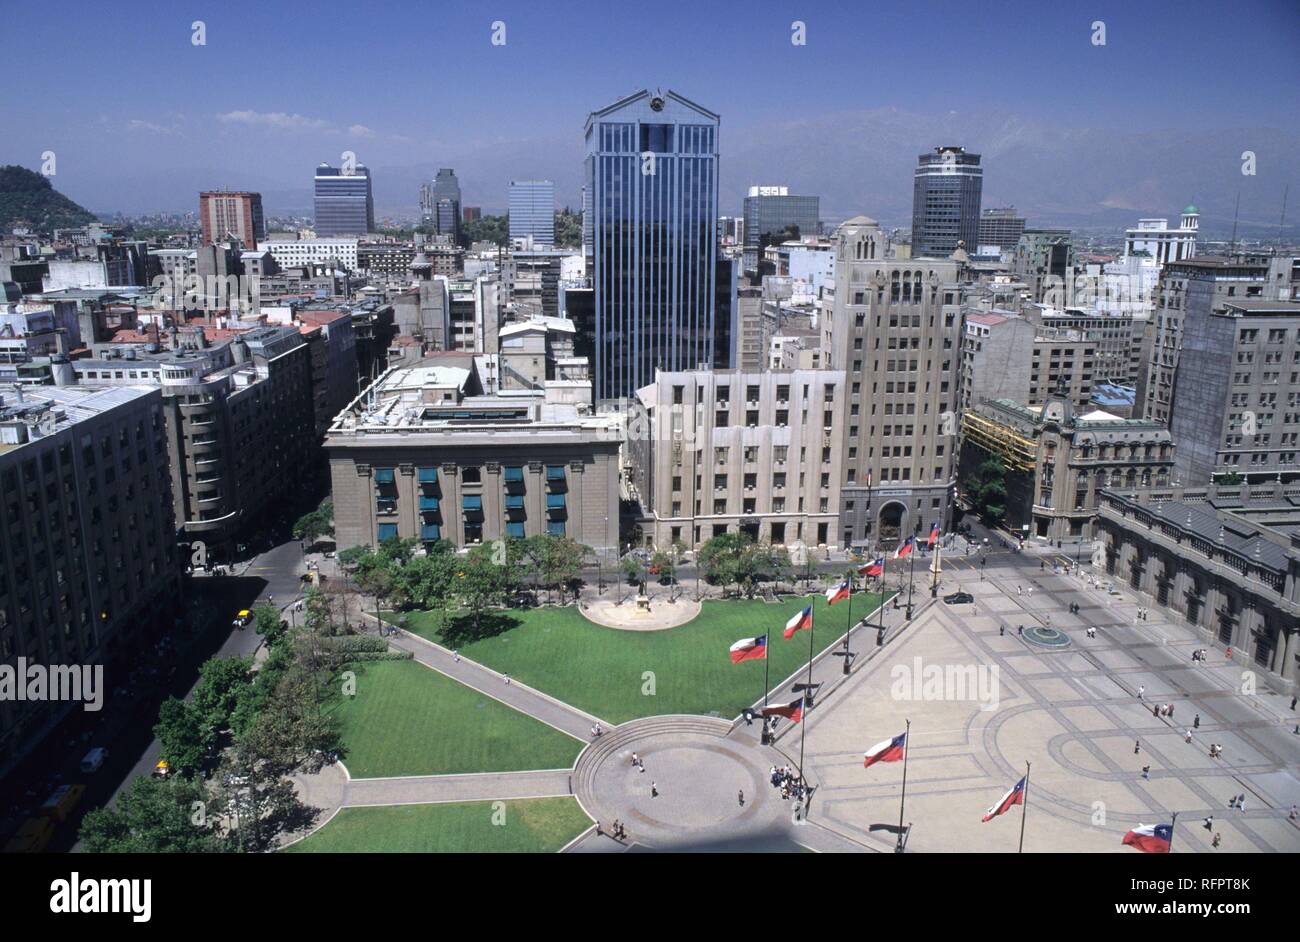 CHL, Chile, Santiago de Chile: view the town center and the park beside the palace of the President. Stock Photo